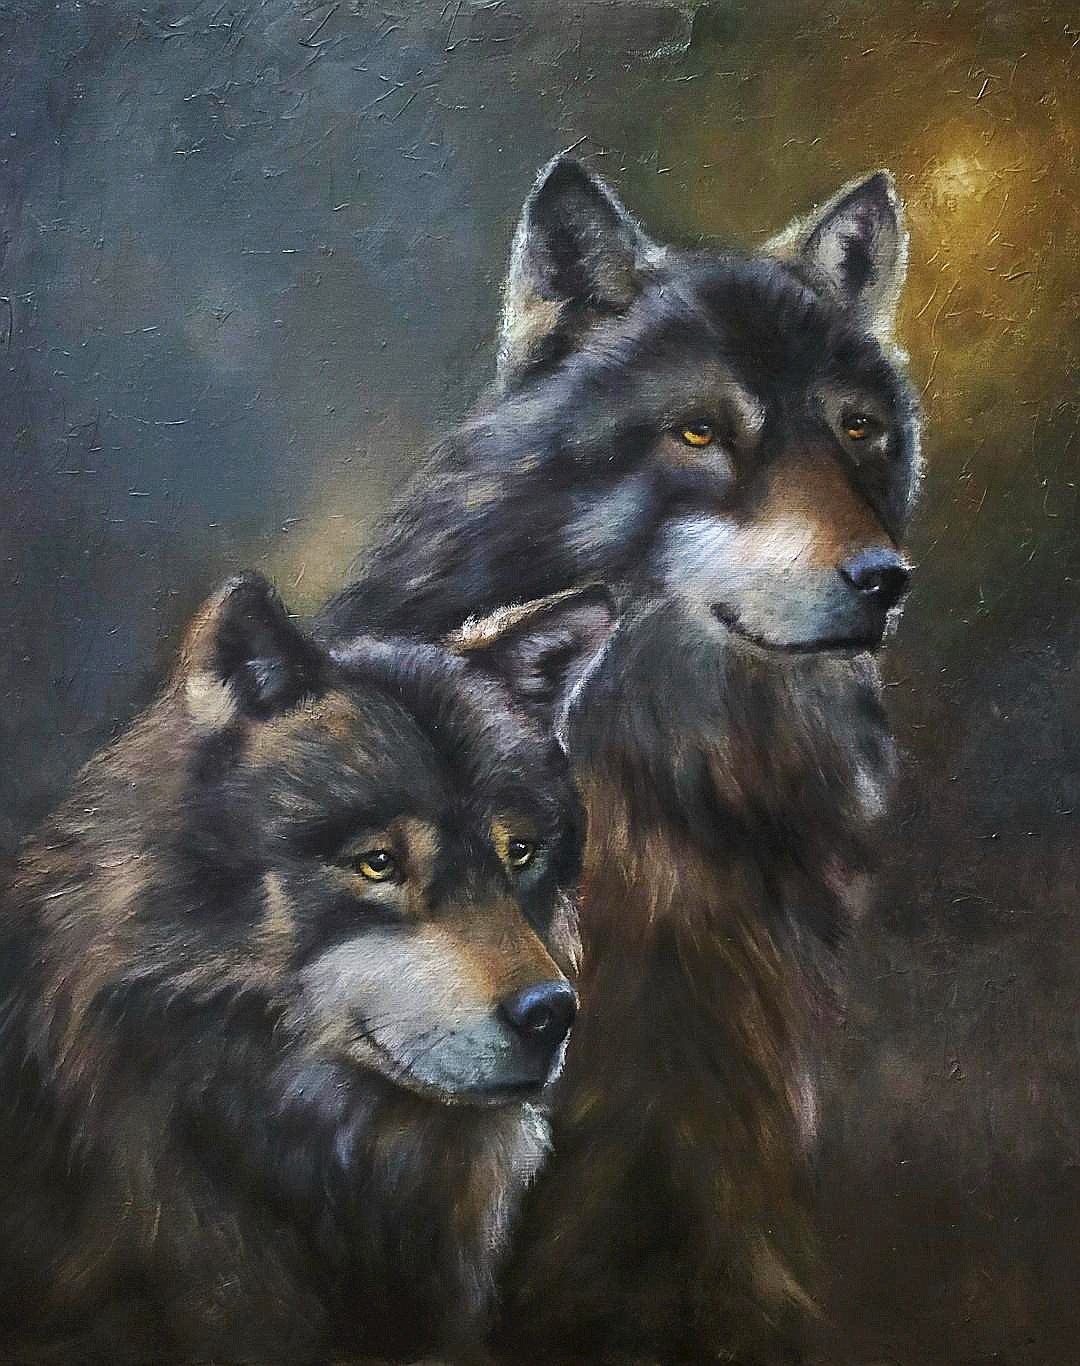 "Always Alert," by Deborah McKenna will be displayed at Cawdrey Gallery in Whitefish June 1 in a show titled "Tales from the Forest and the Creatures Within." The artist selected a series of oil painting illustrations for an upcoming children's book written by her daughter, Lauri Wilson of Kalispell, who will be reading selected passages. (Courtesy photo)